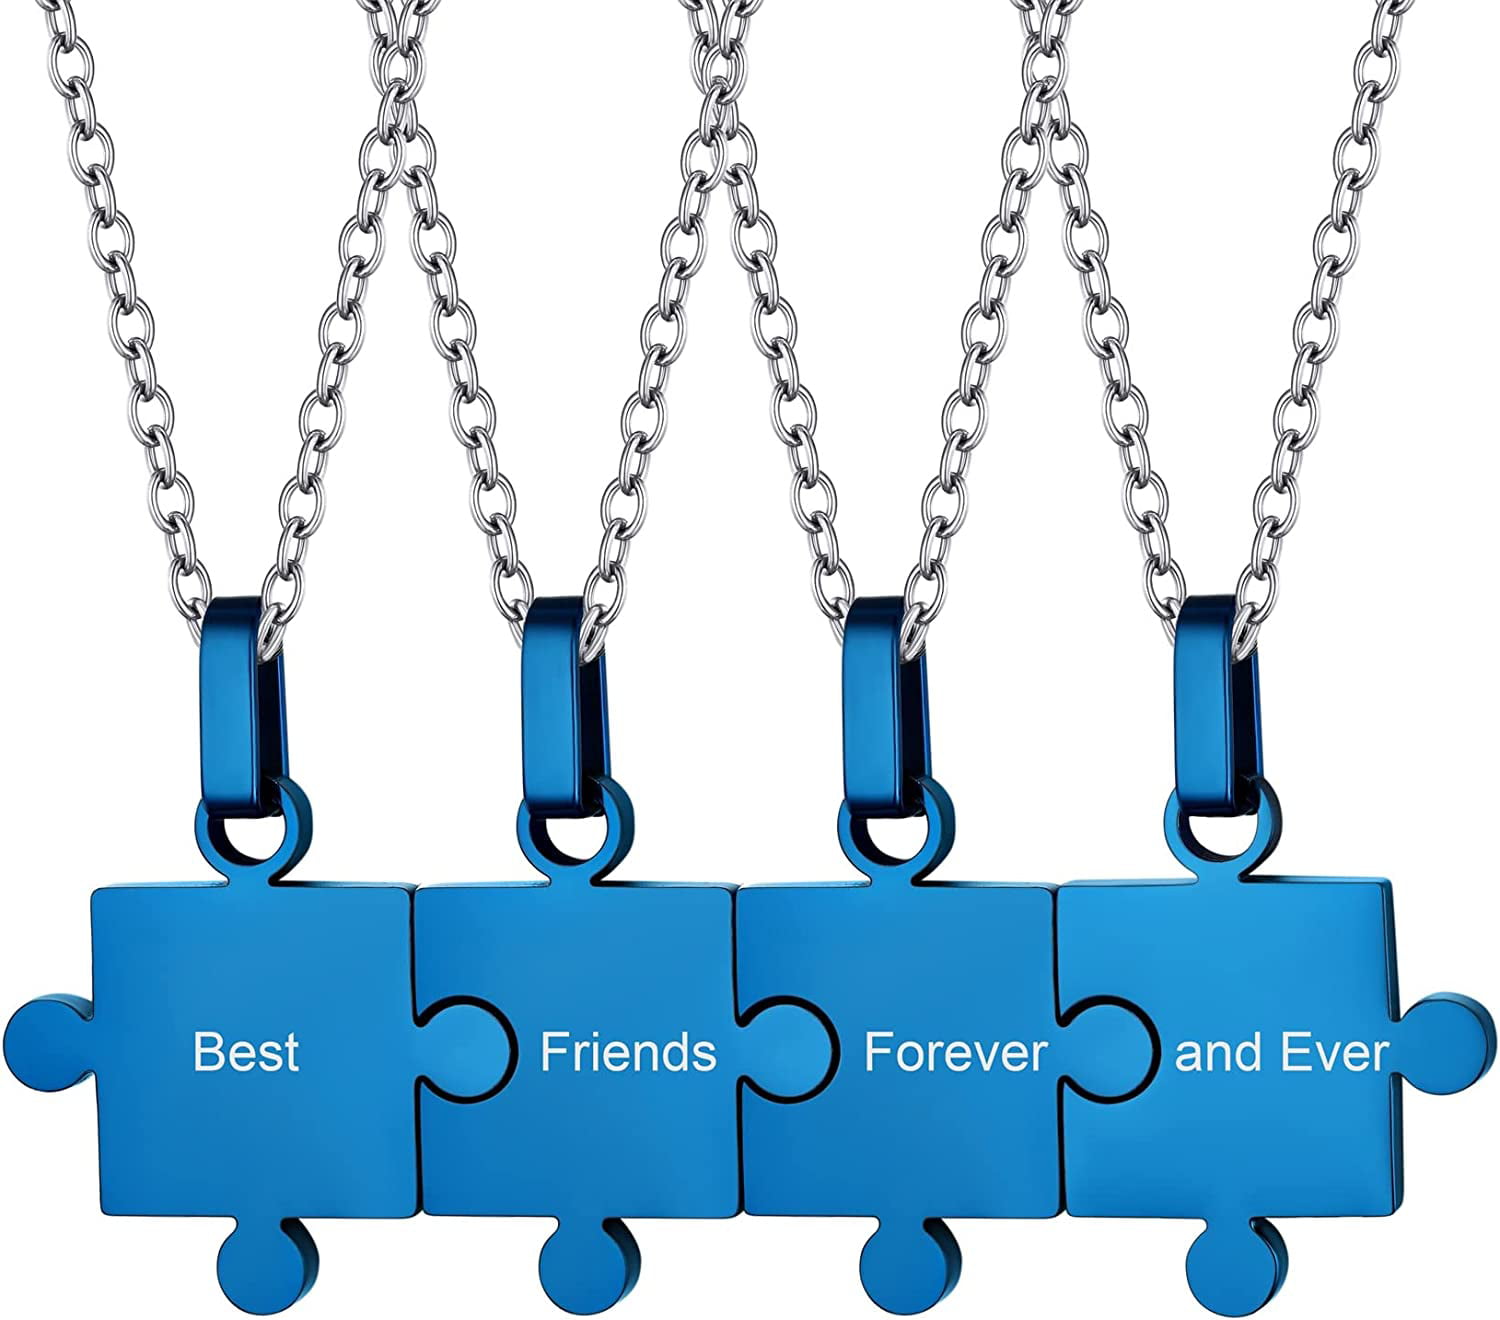 BFF Friendship Necklace for 2 - Best Friend Necklaces BFF Gifts for 2  Matching H | eBay